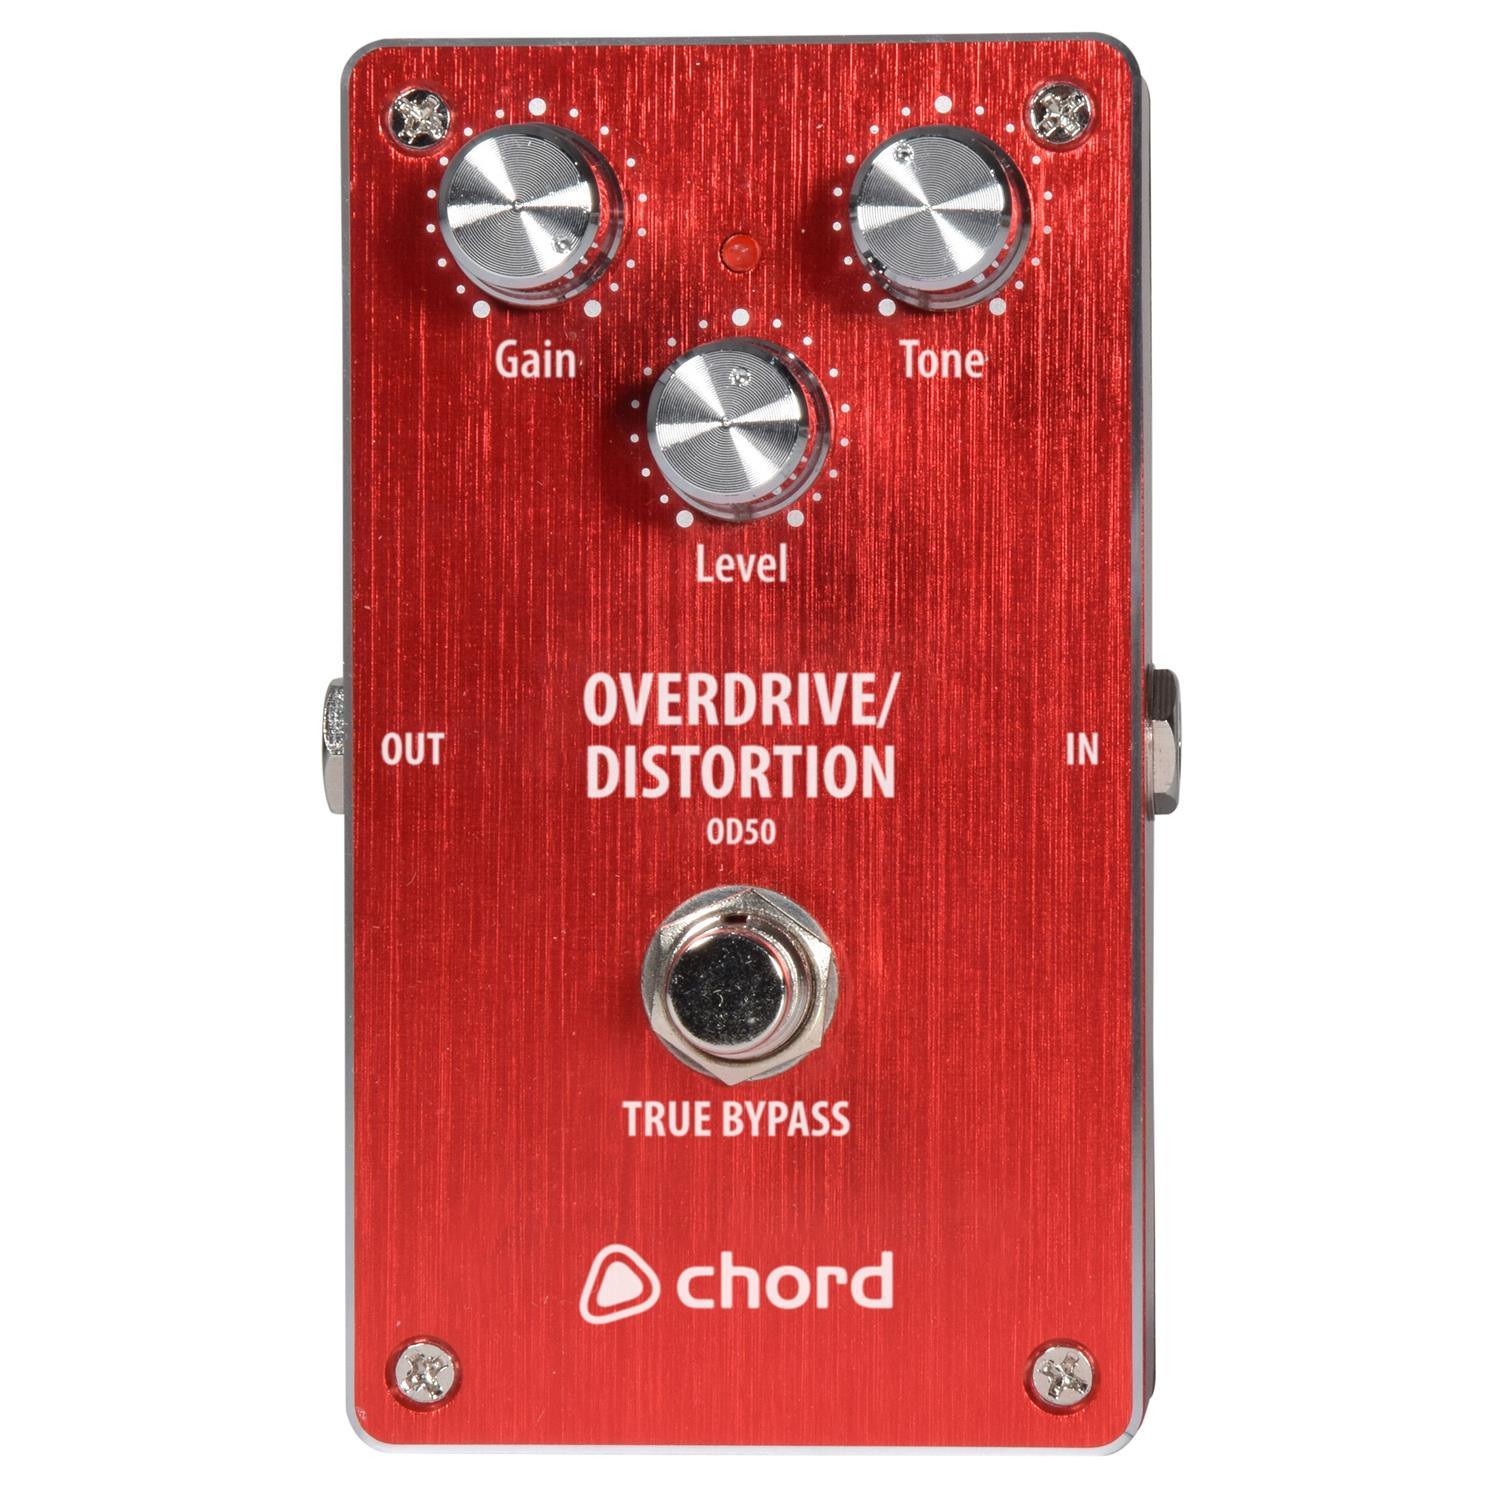 Chord OD-50 Overdrive / Distortion Pedal - DY Pro Audio